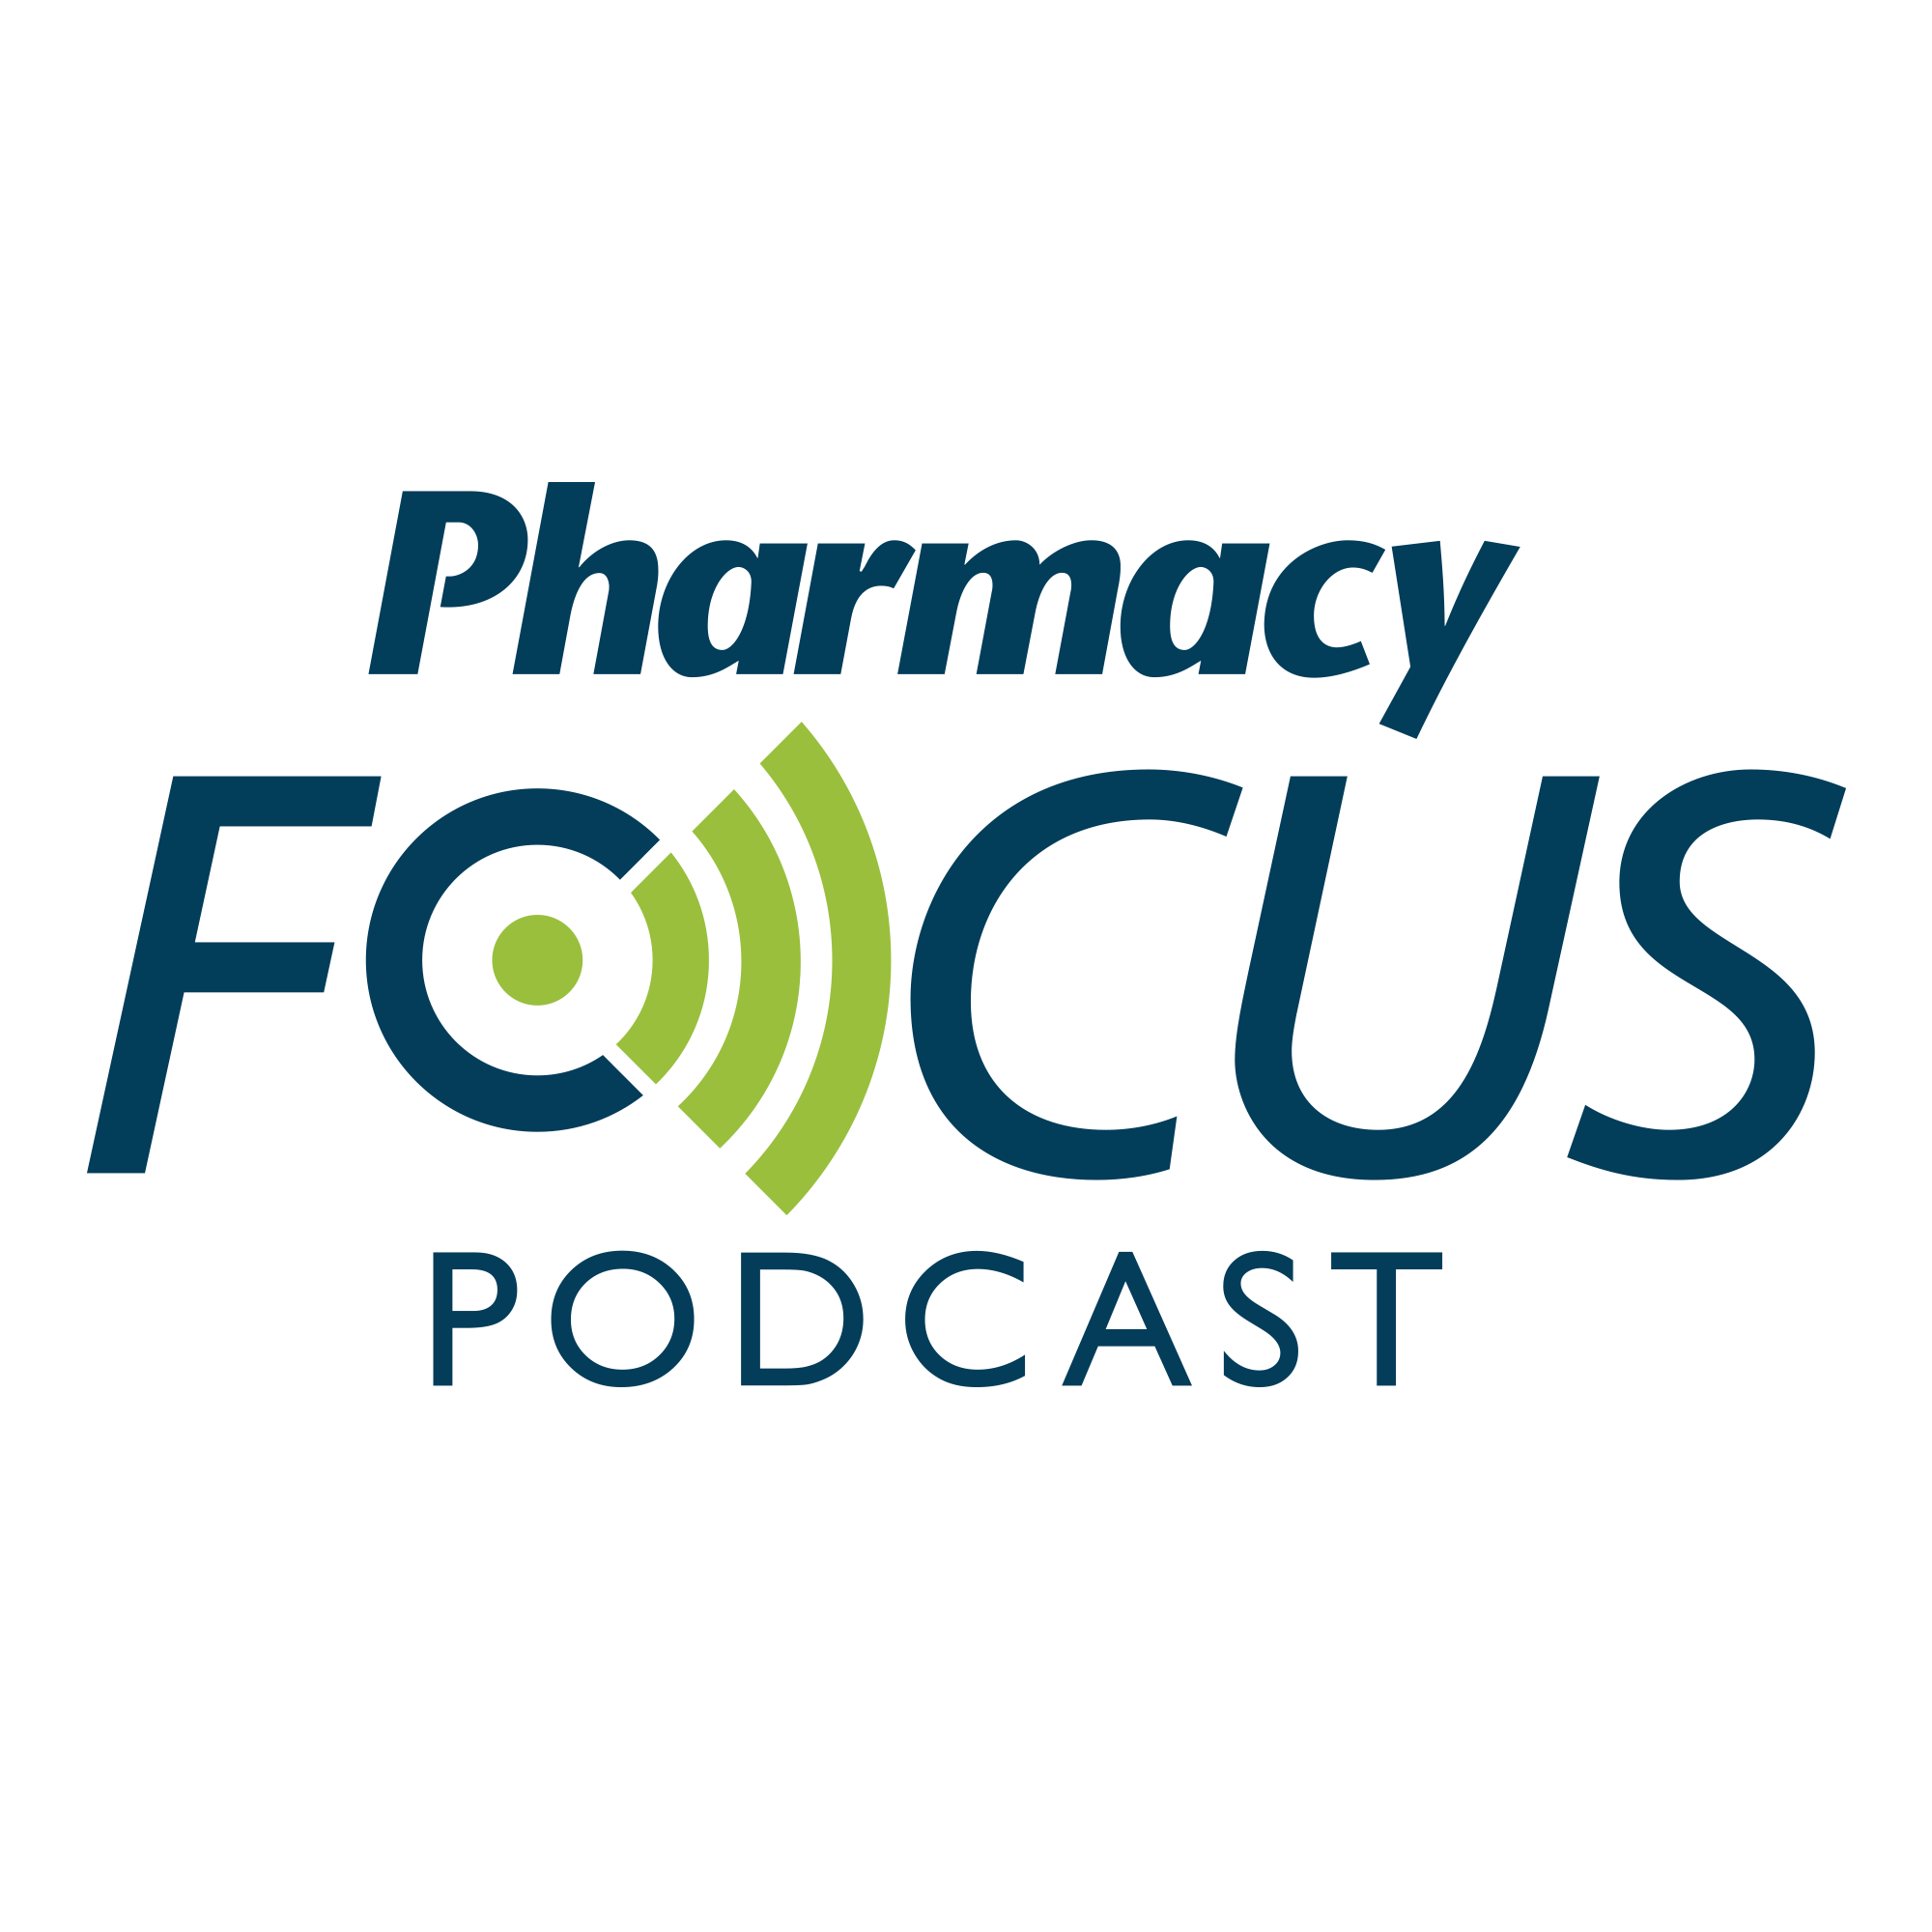 Pharmacy Focus: Conversations On Reproductive Health